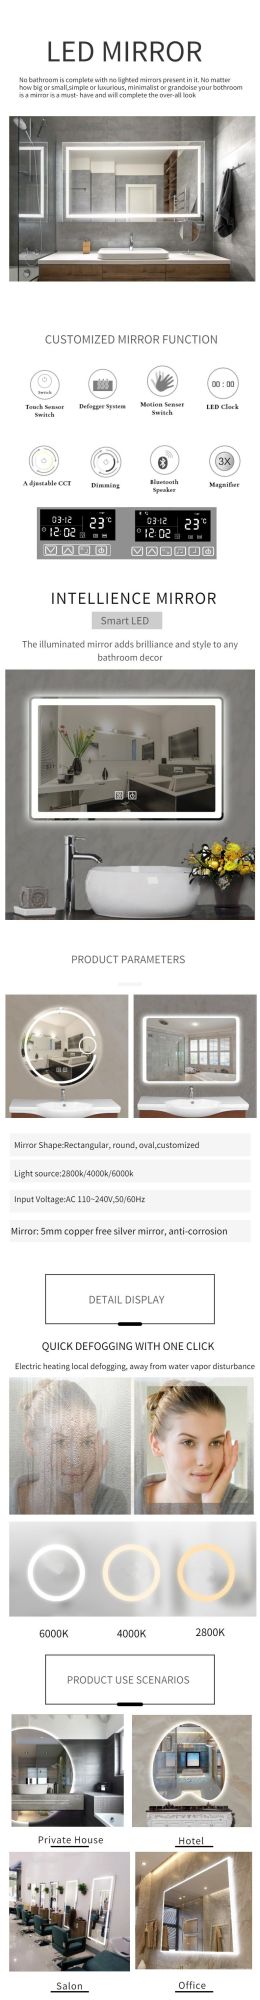 High Quality Wall Mounted Smart LED Mirror for Home/Hotel Bathroom Decoration